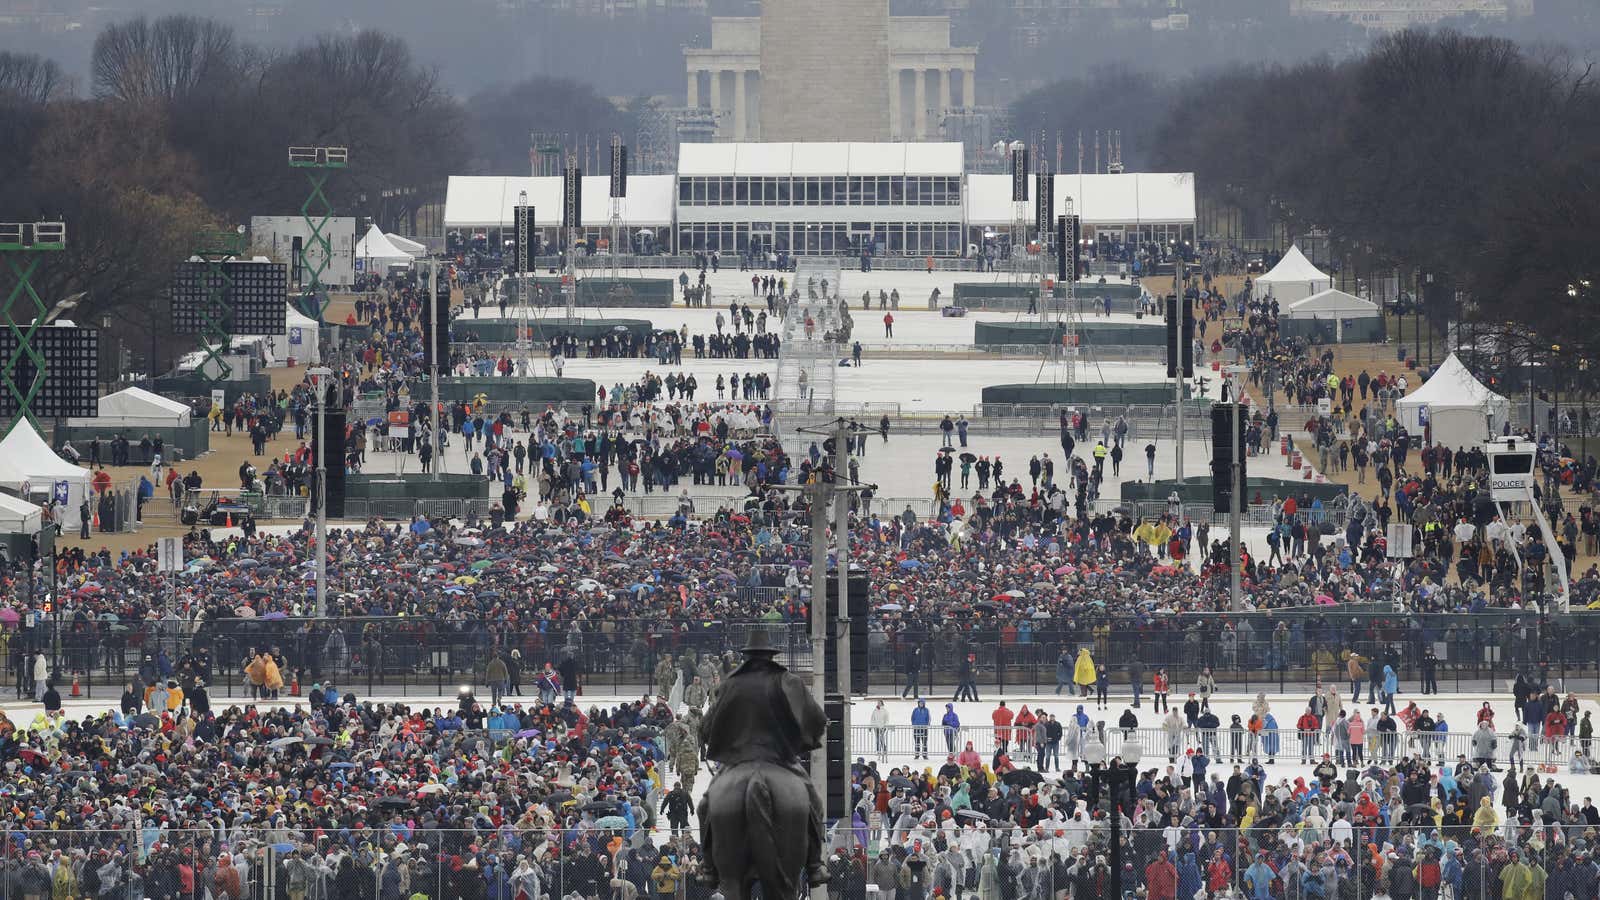 Crowds fill in along the National Mall before the swearing in of Donald Trump as the 45th president of the Untied States on Jan. 20, 2017.